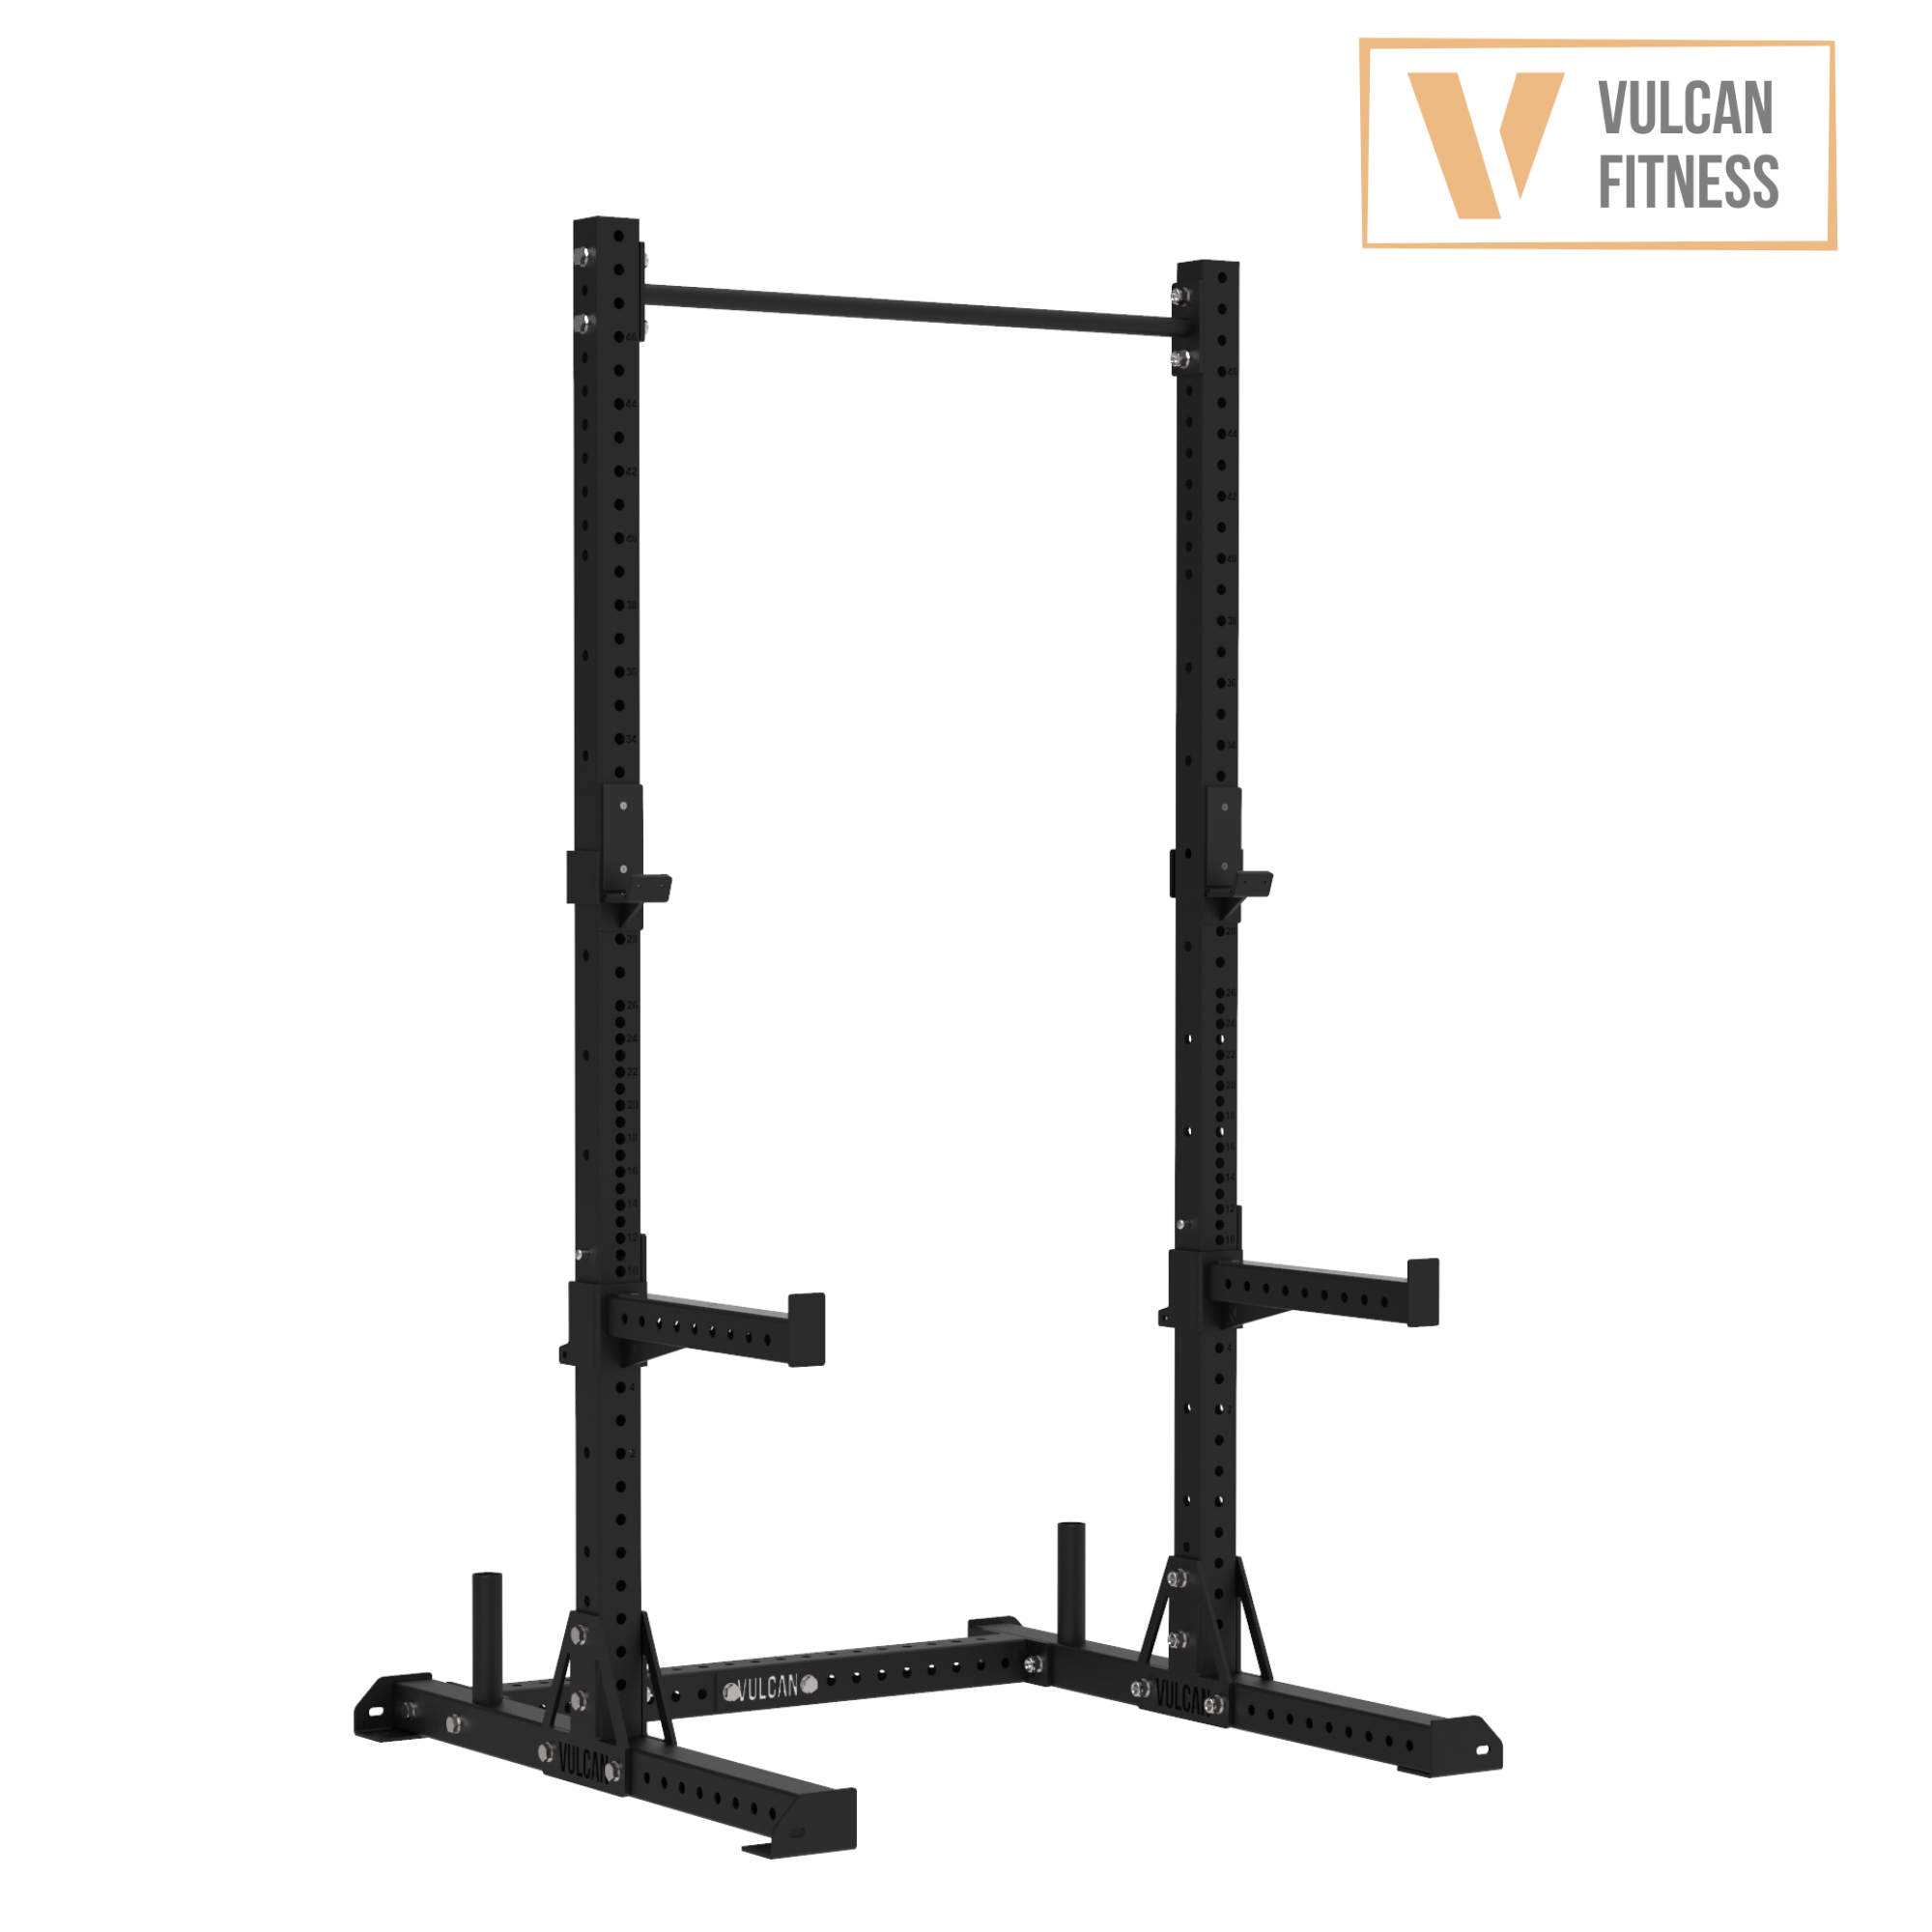 VULCAN Elite Squat Rack, Olympic Barbell, 150kg Colour Bumper Weight Plates & Adjustable Bench | IN STOCK